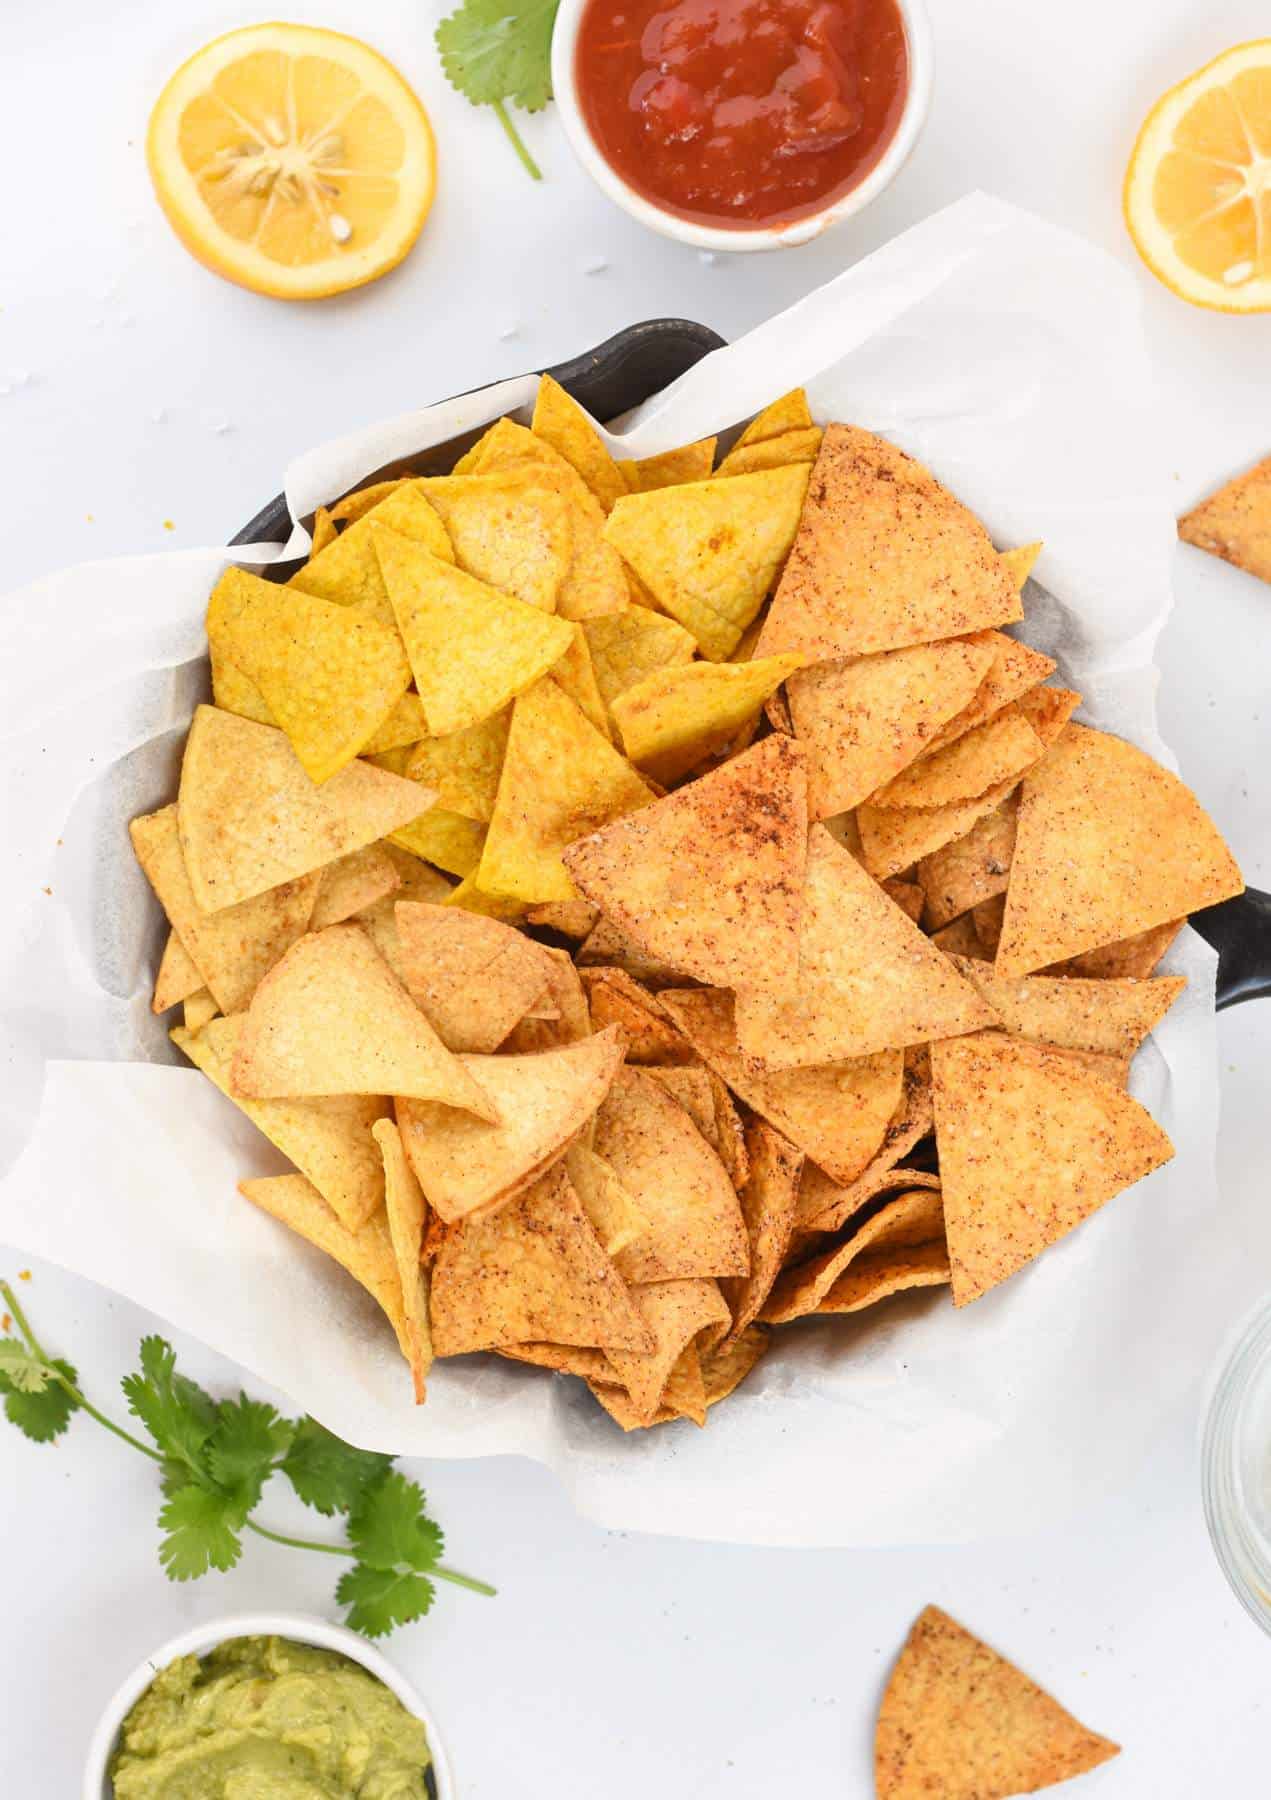 How To Make Tortilla Chips In Air Fryer